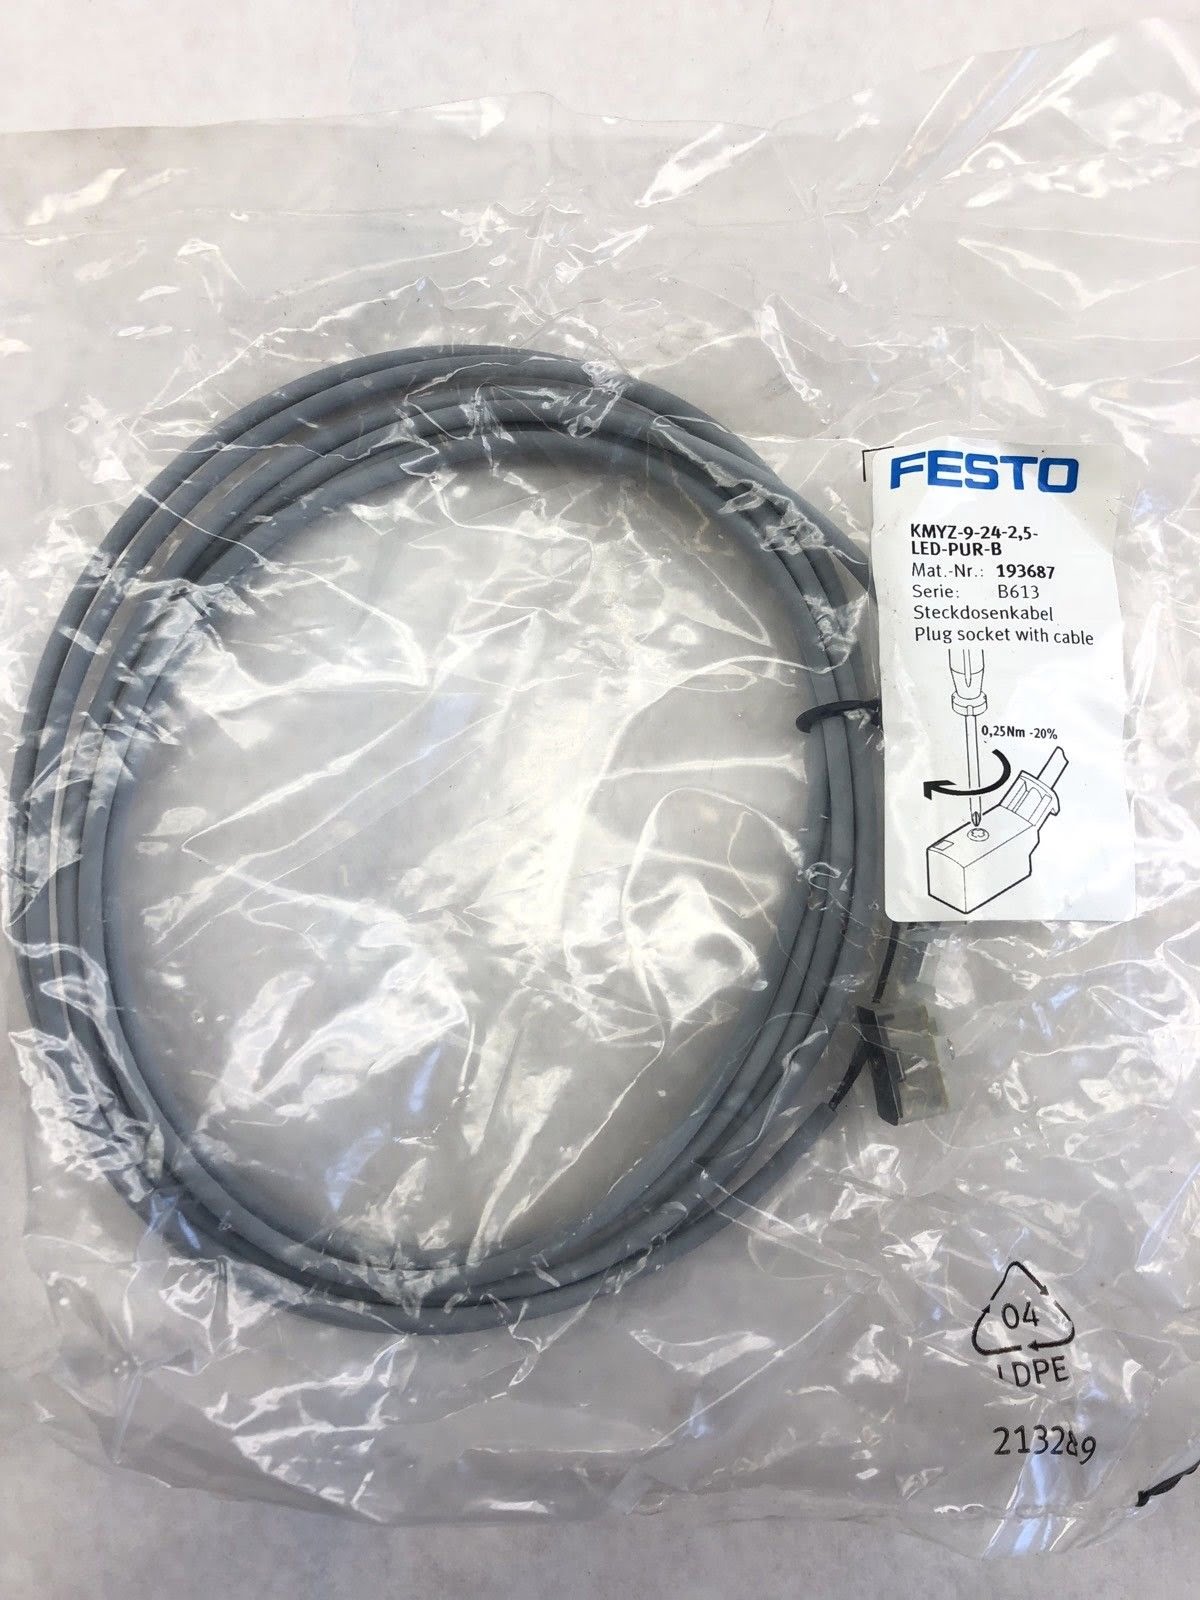 Details about   193685 Festo NEW In Box 5M Connecting Cable With Socket KMYZ-7-24-5-LED-PUR 